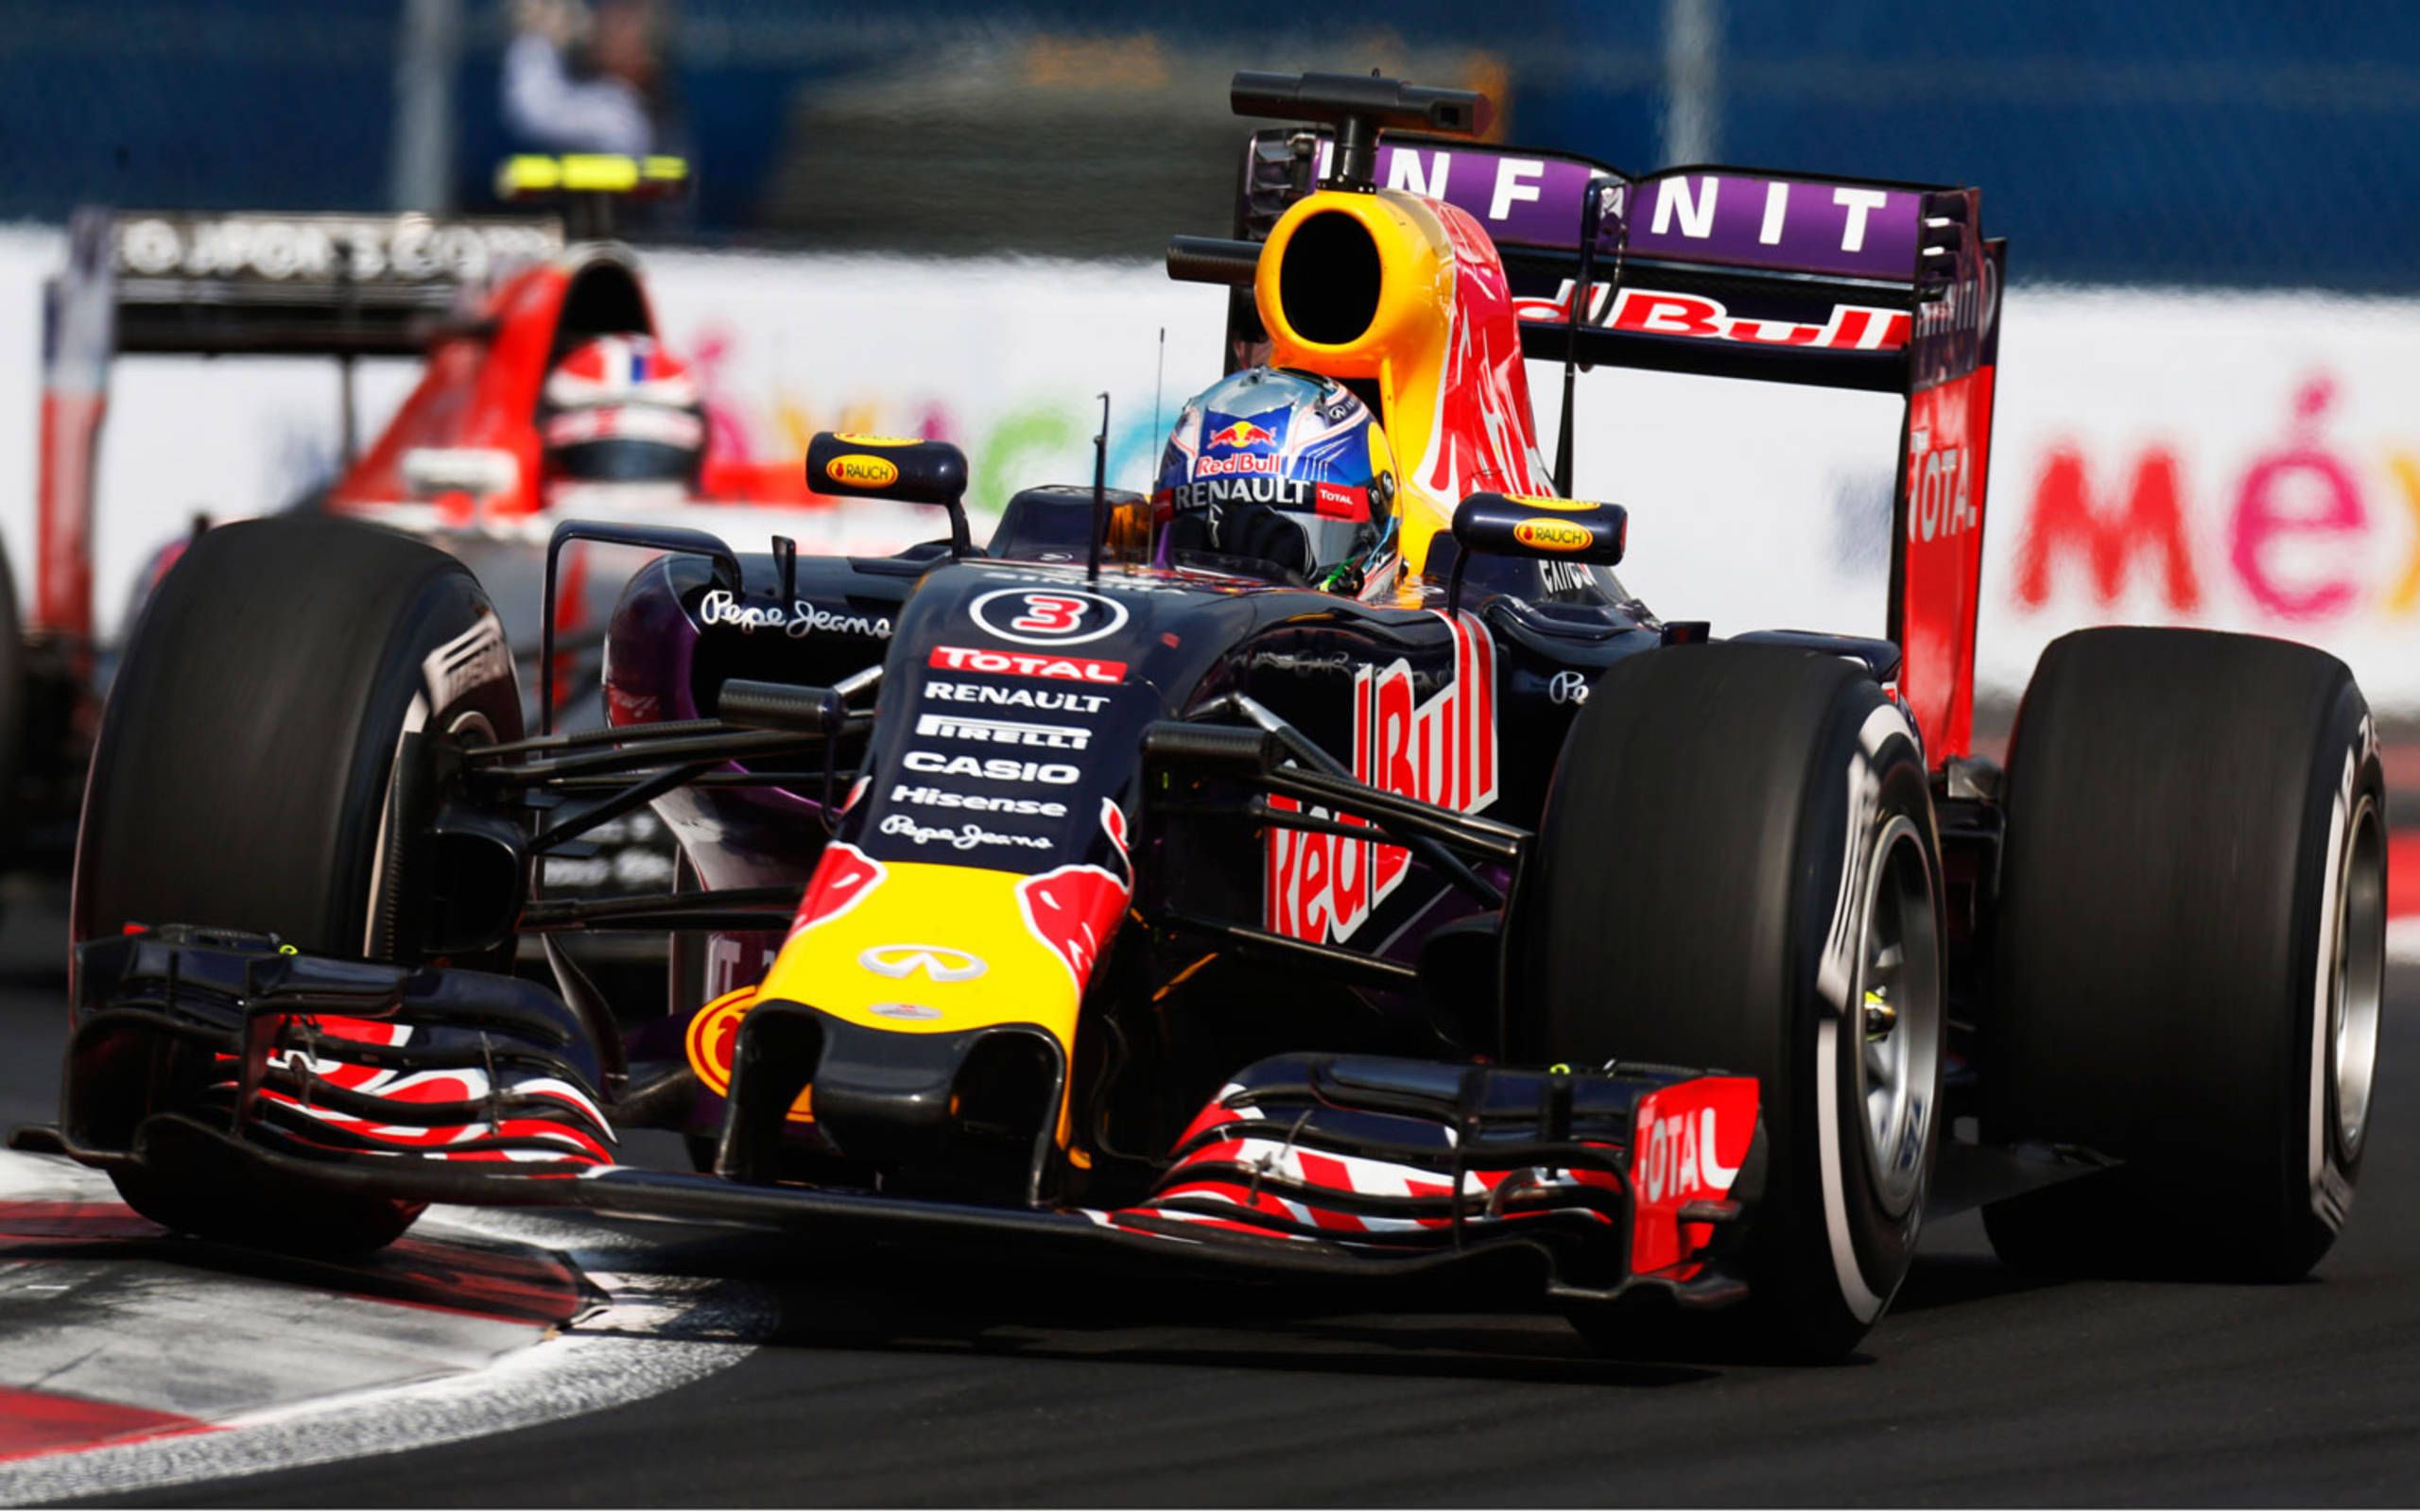 Red Bull Racing 2016 Formula One championship after threatening quit